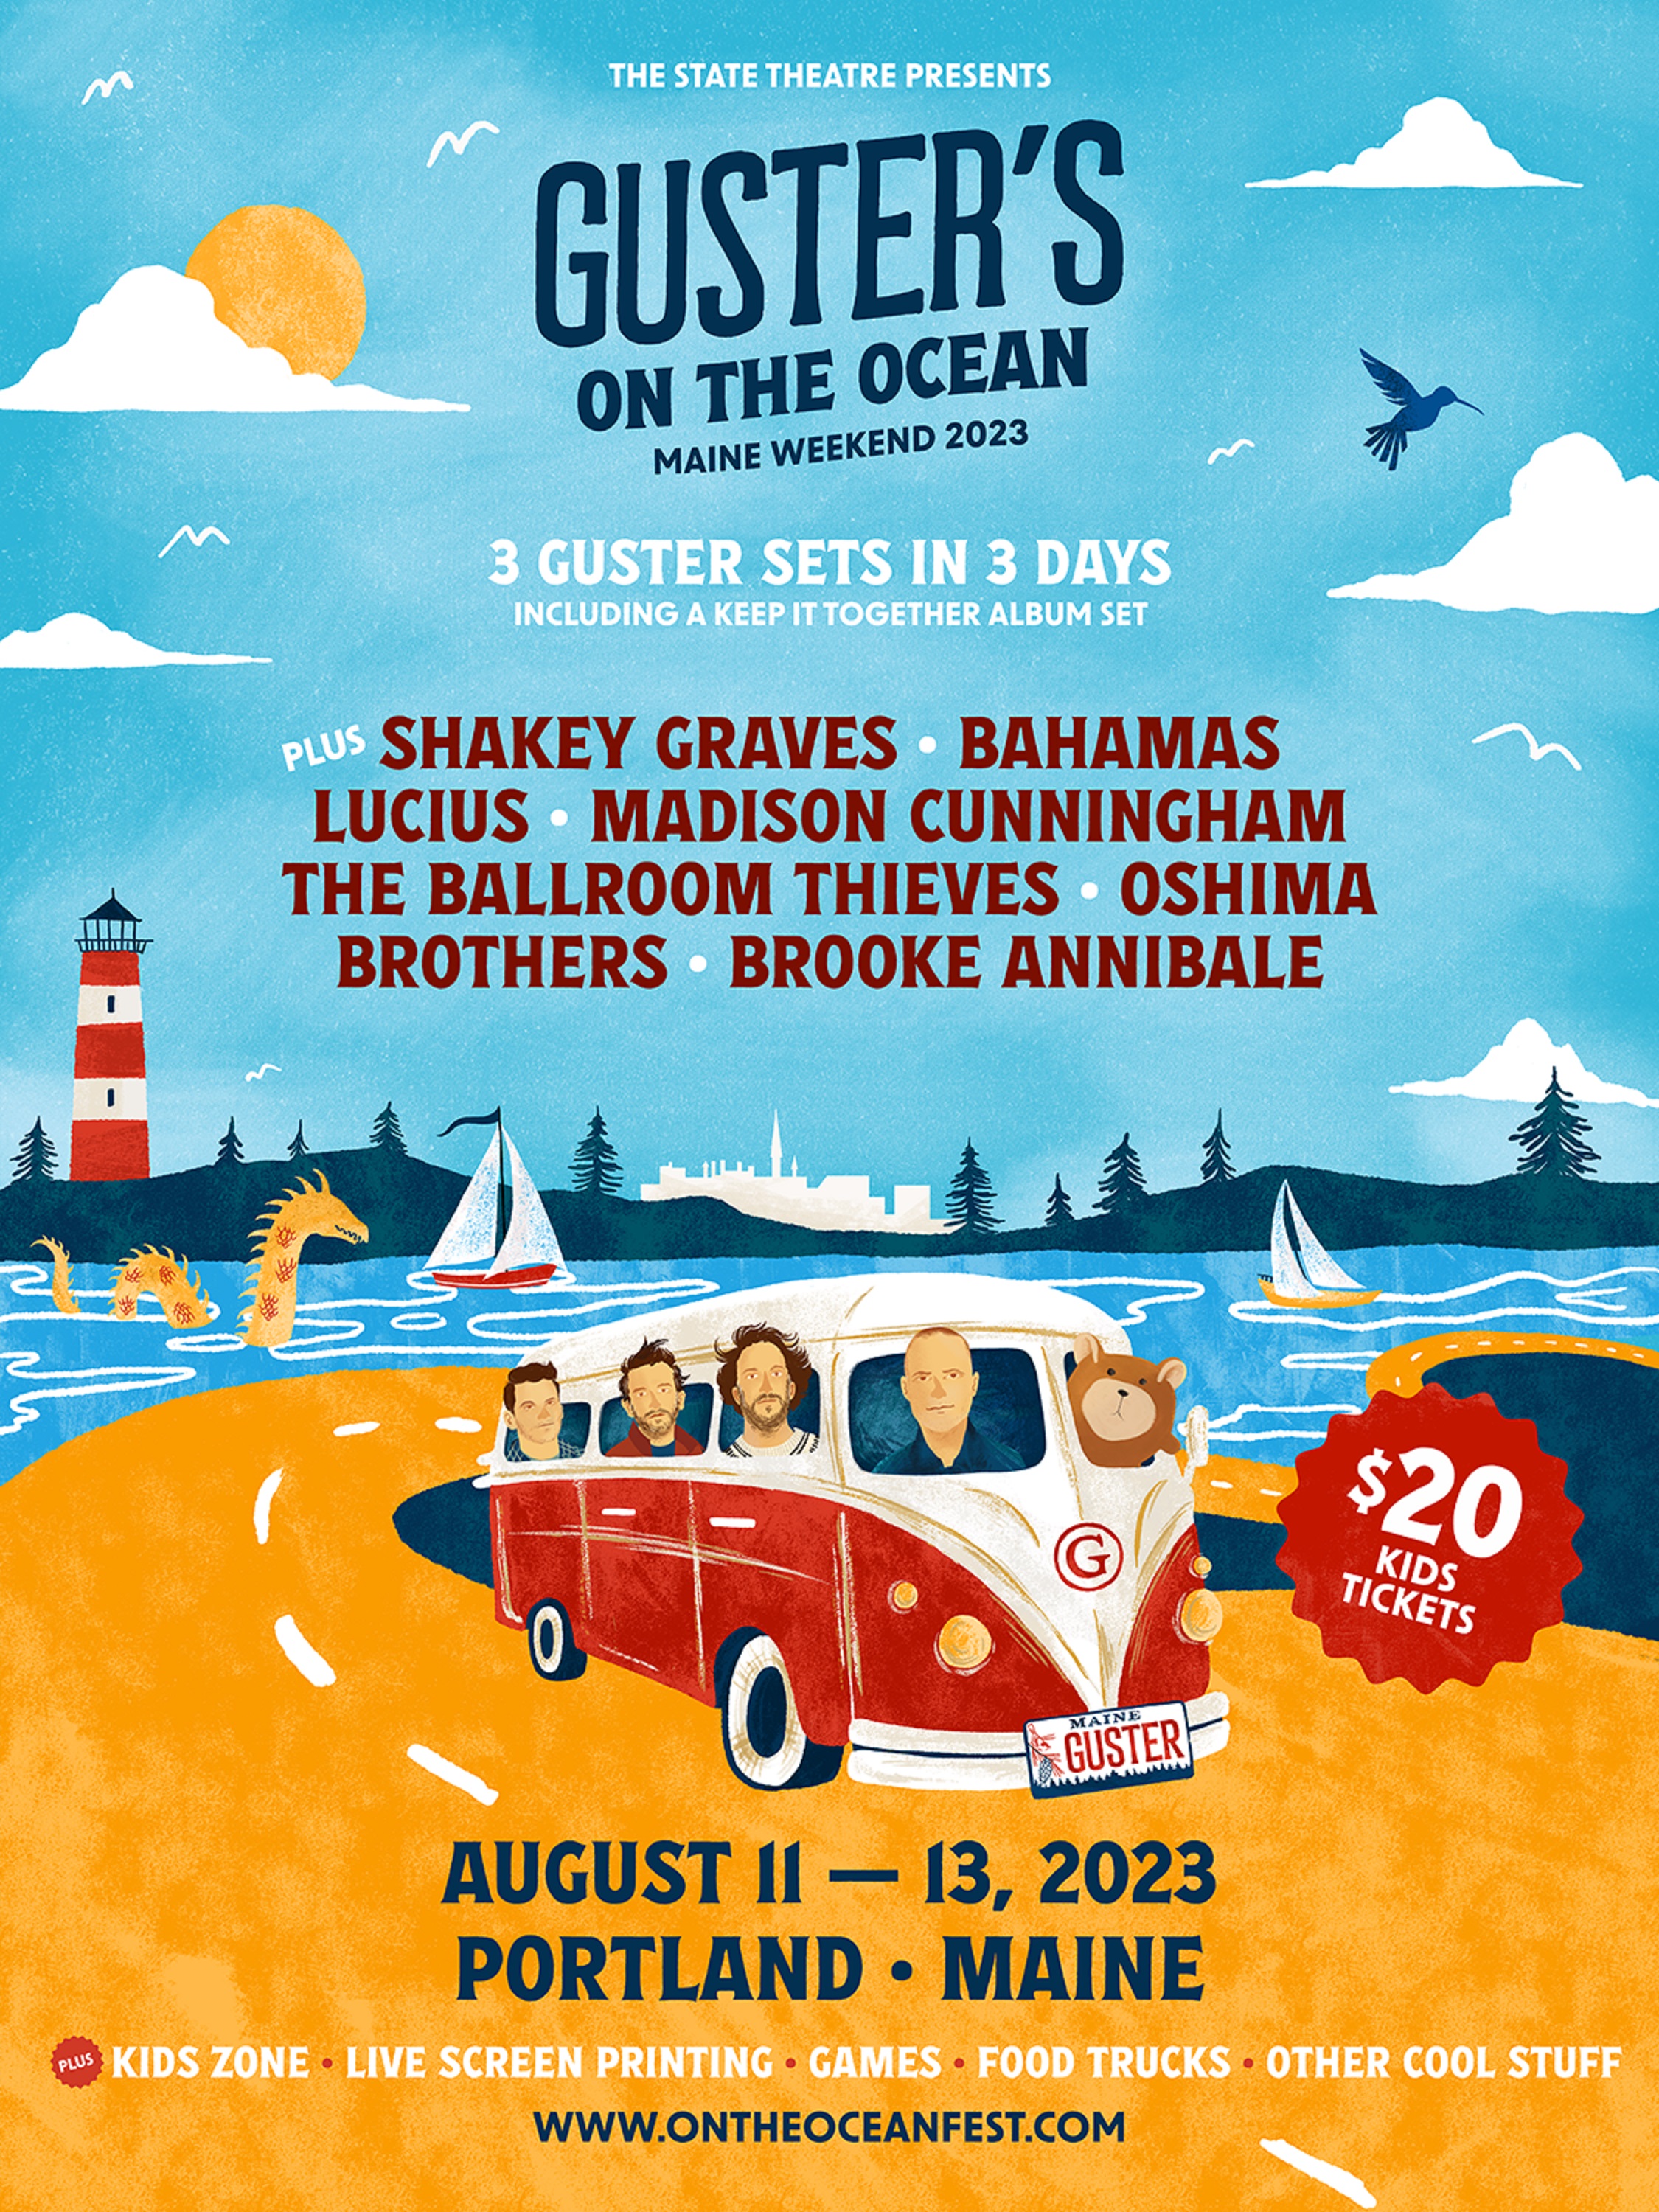 Guster's On The Ocean Weekend expands to three days Aug 11-13 in Portland; line-up announced and tickets on sale this Friday